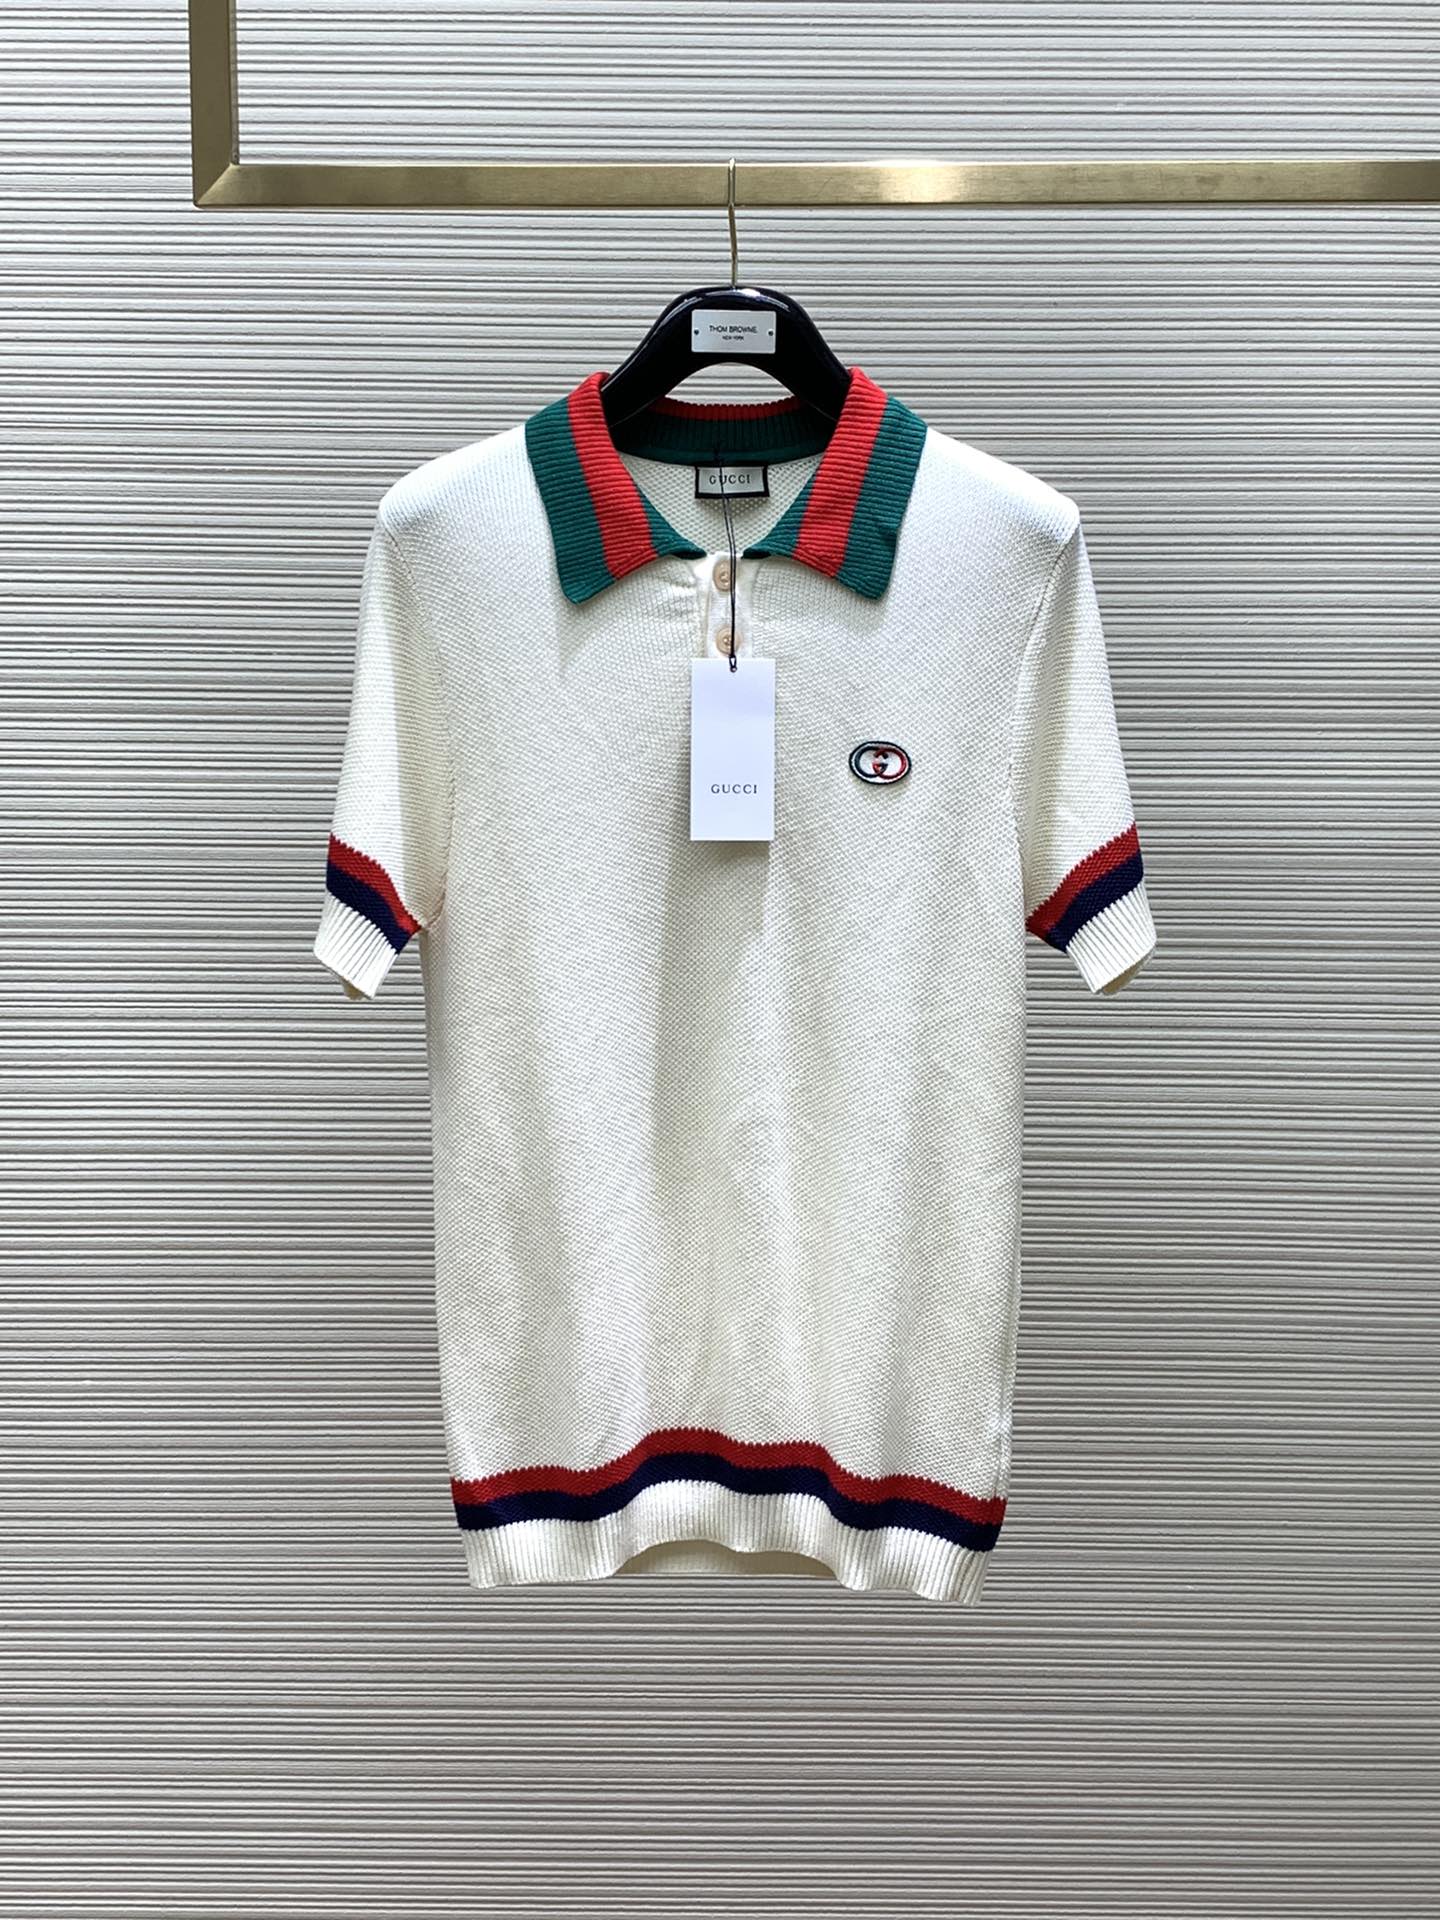 Gucci Clothing Polo Exclusive Cheap
 Embroidery Knitting Summer Collection Fashion Casual